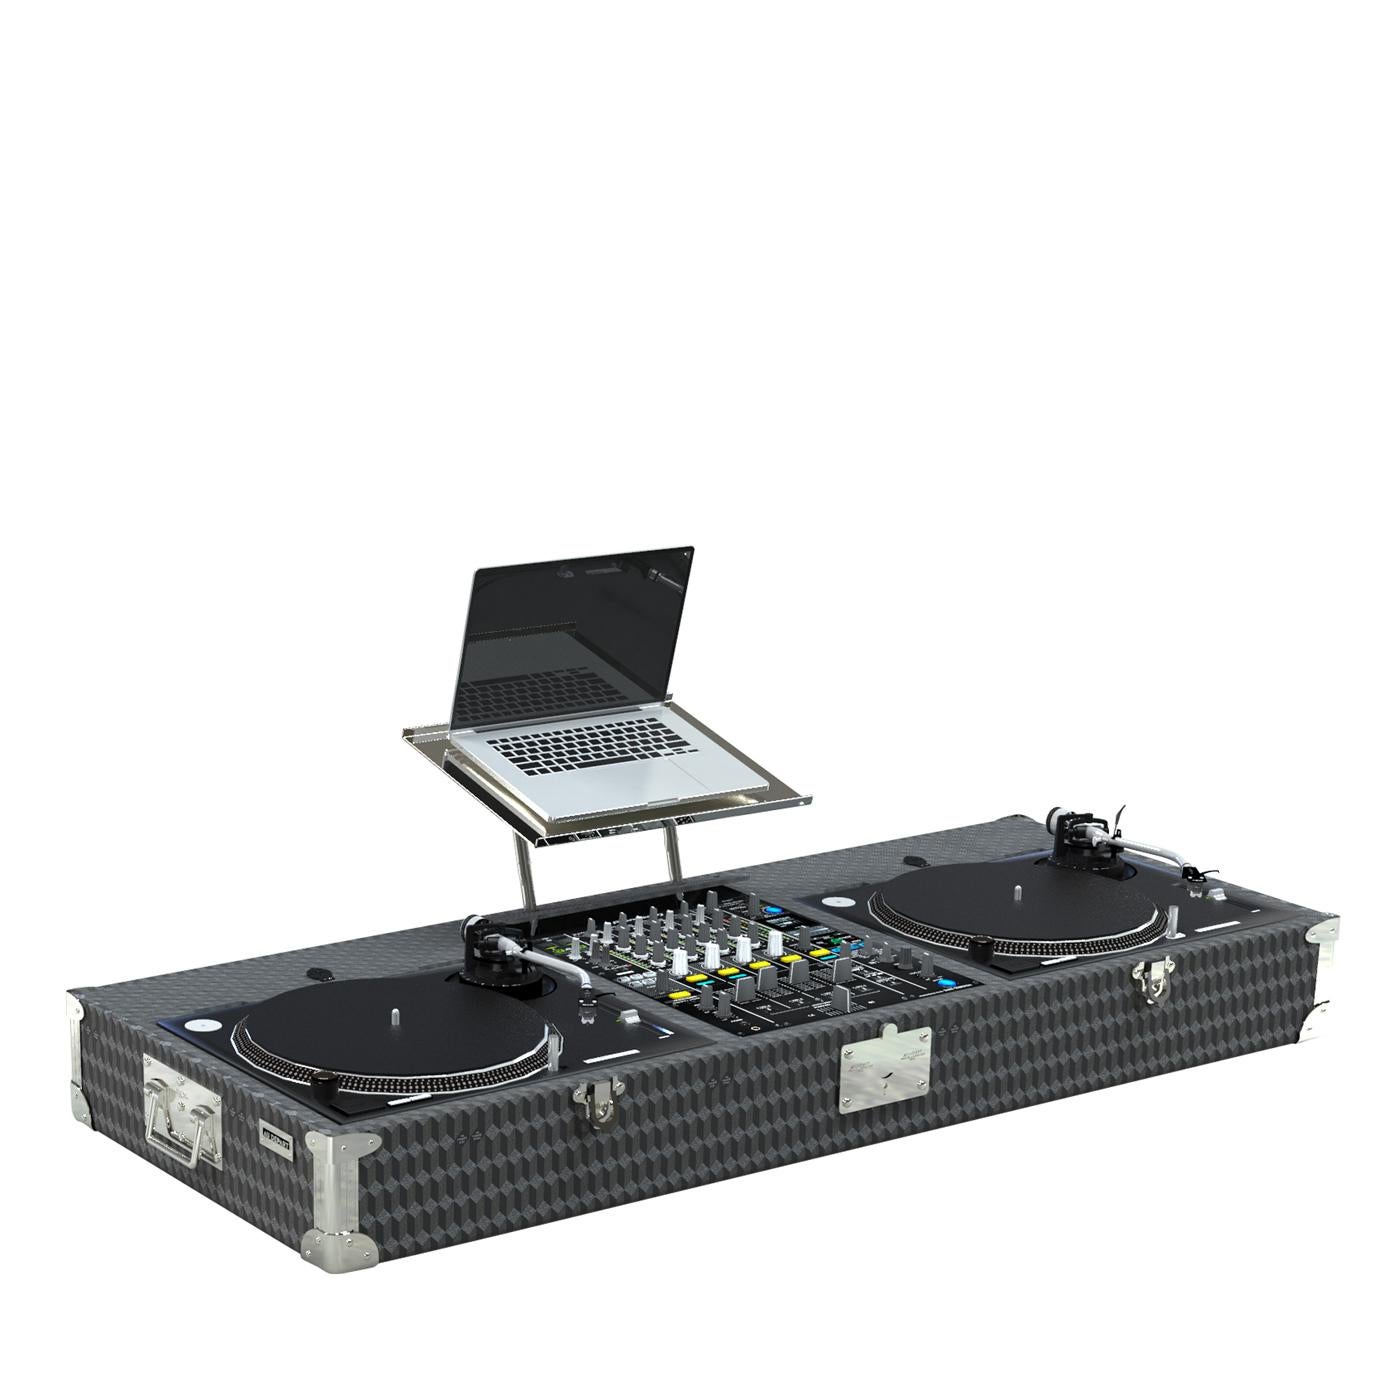 A full entertainment set enclosed in a sophisticated case, this DJ vinyl set trunk combines the latest technology and the traditional craftsmanship heritage of Au Depart into one exquisite piece. It is equipped with one Pioneer mixer DJM900nxs2, two